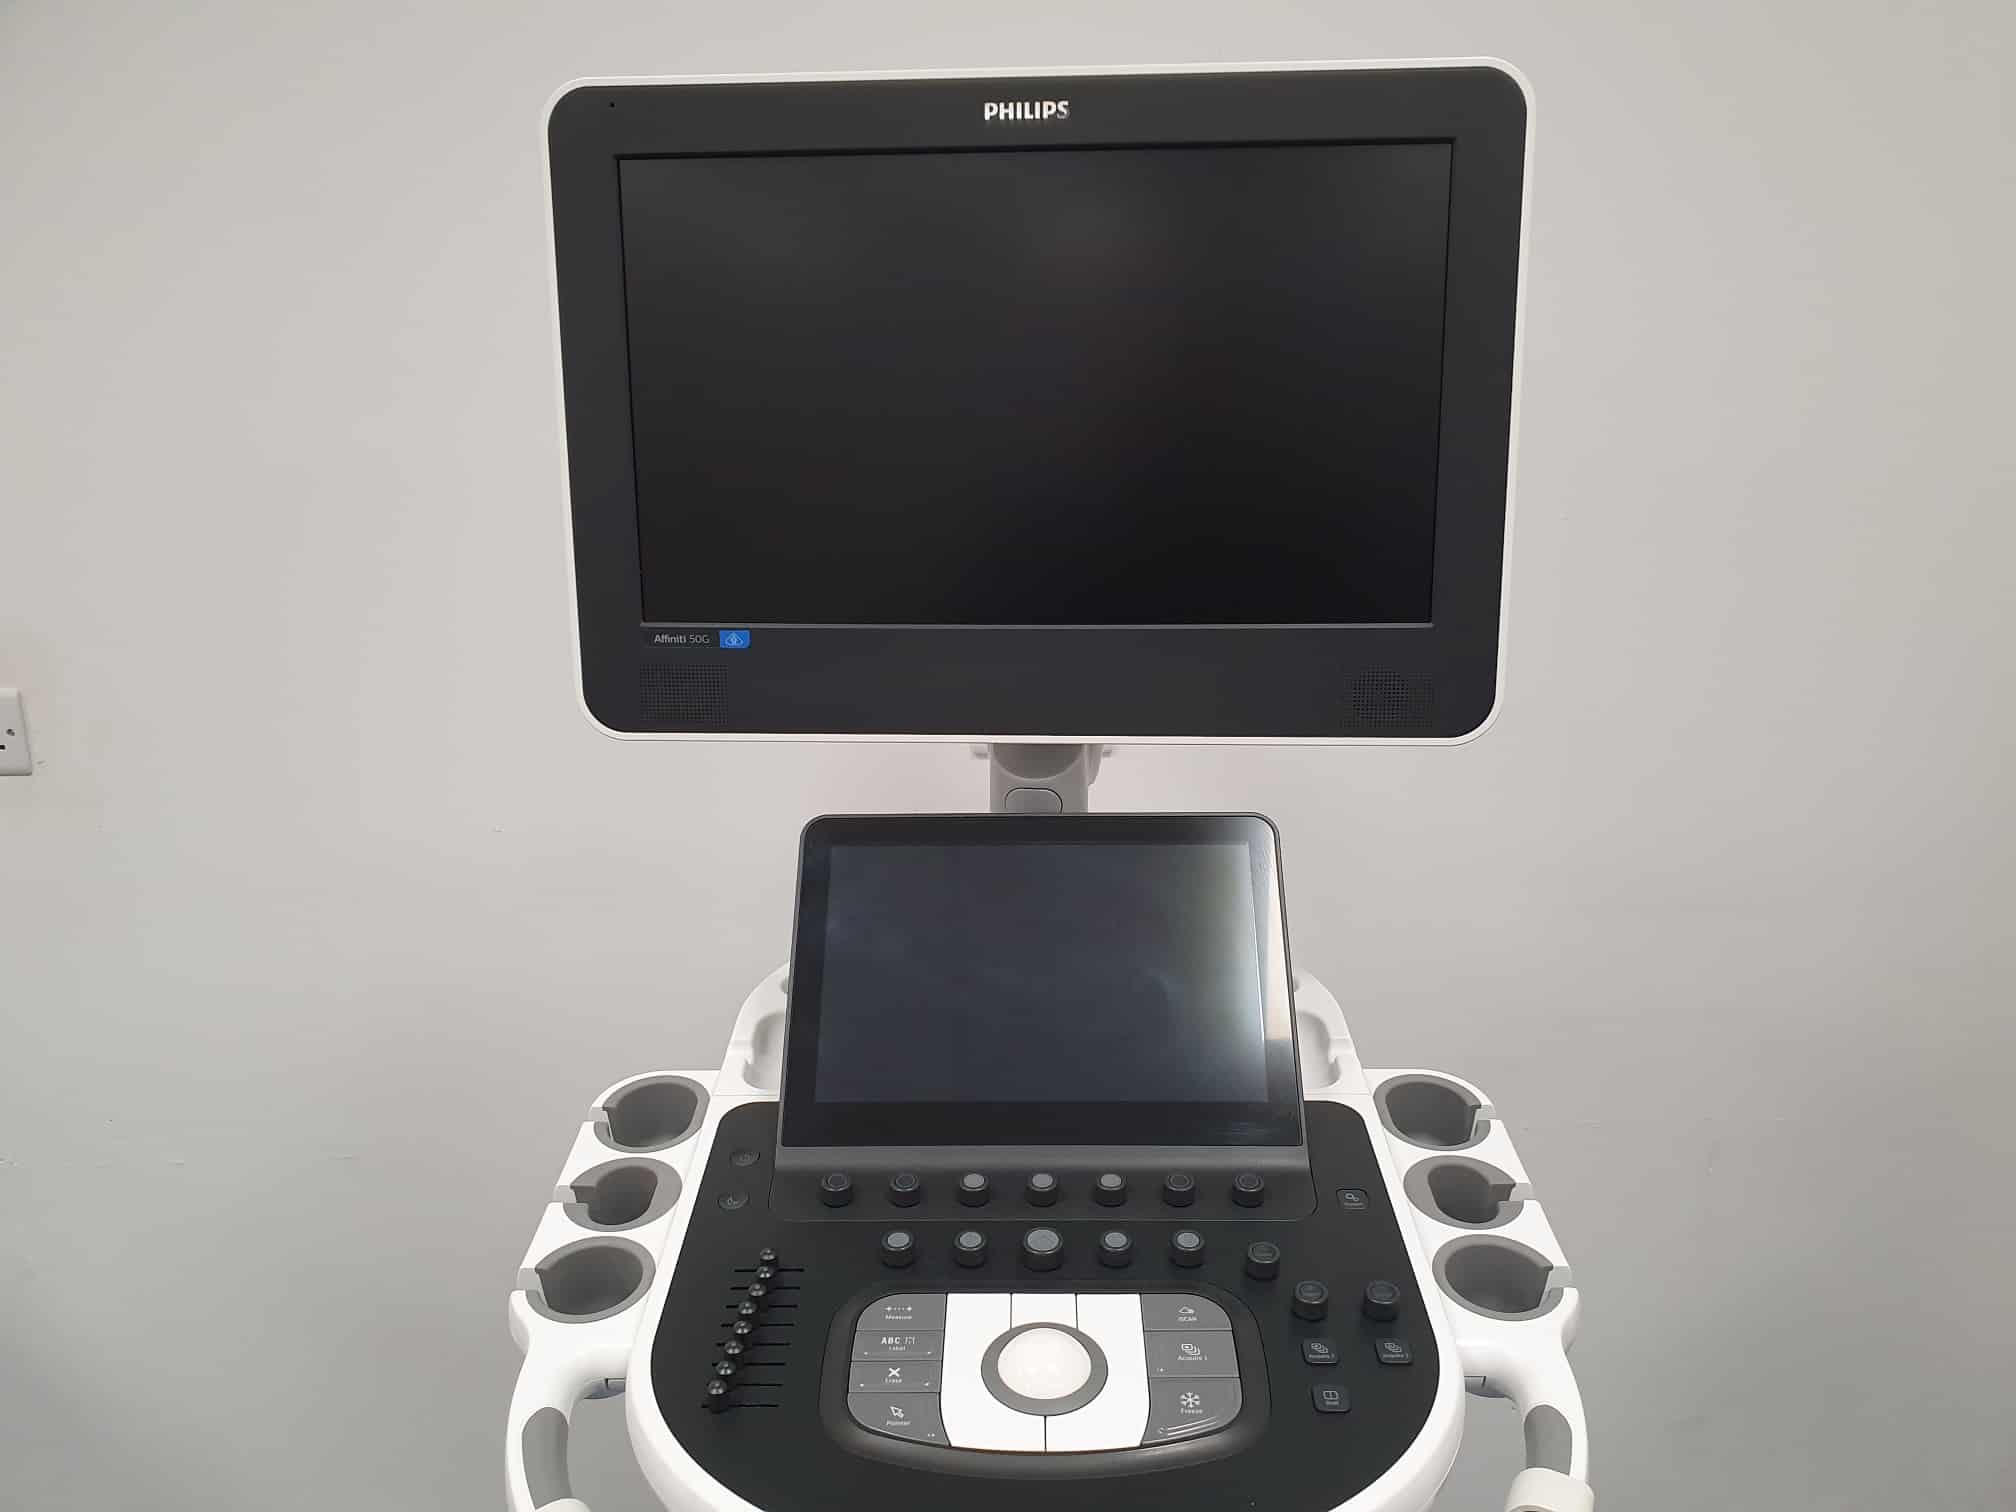 image of ultrasound rental we have available